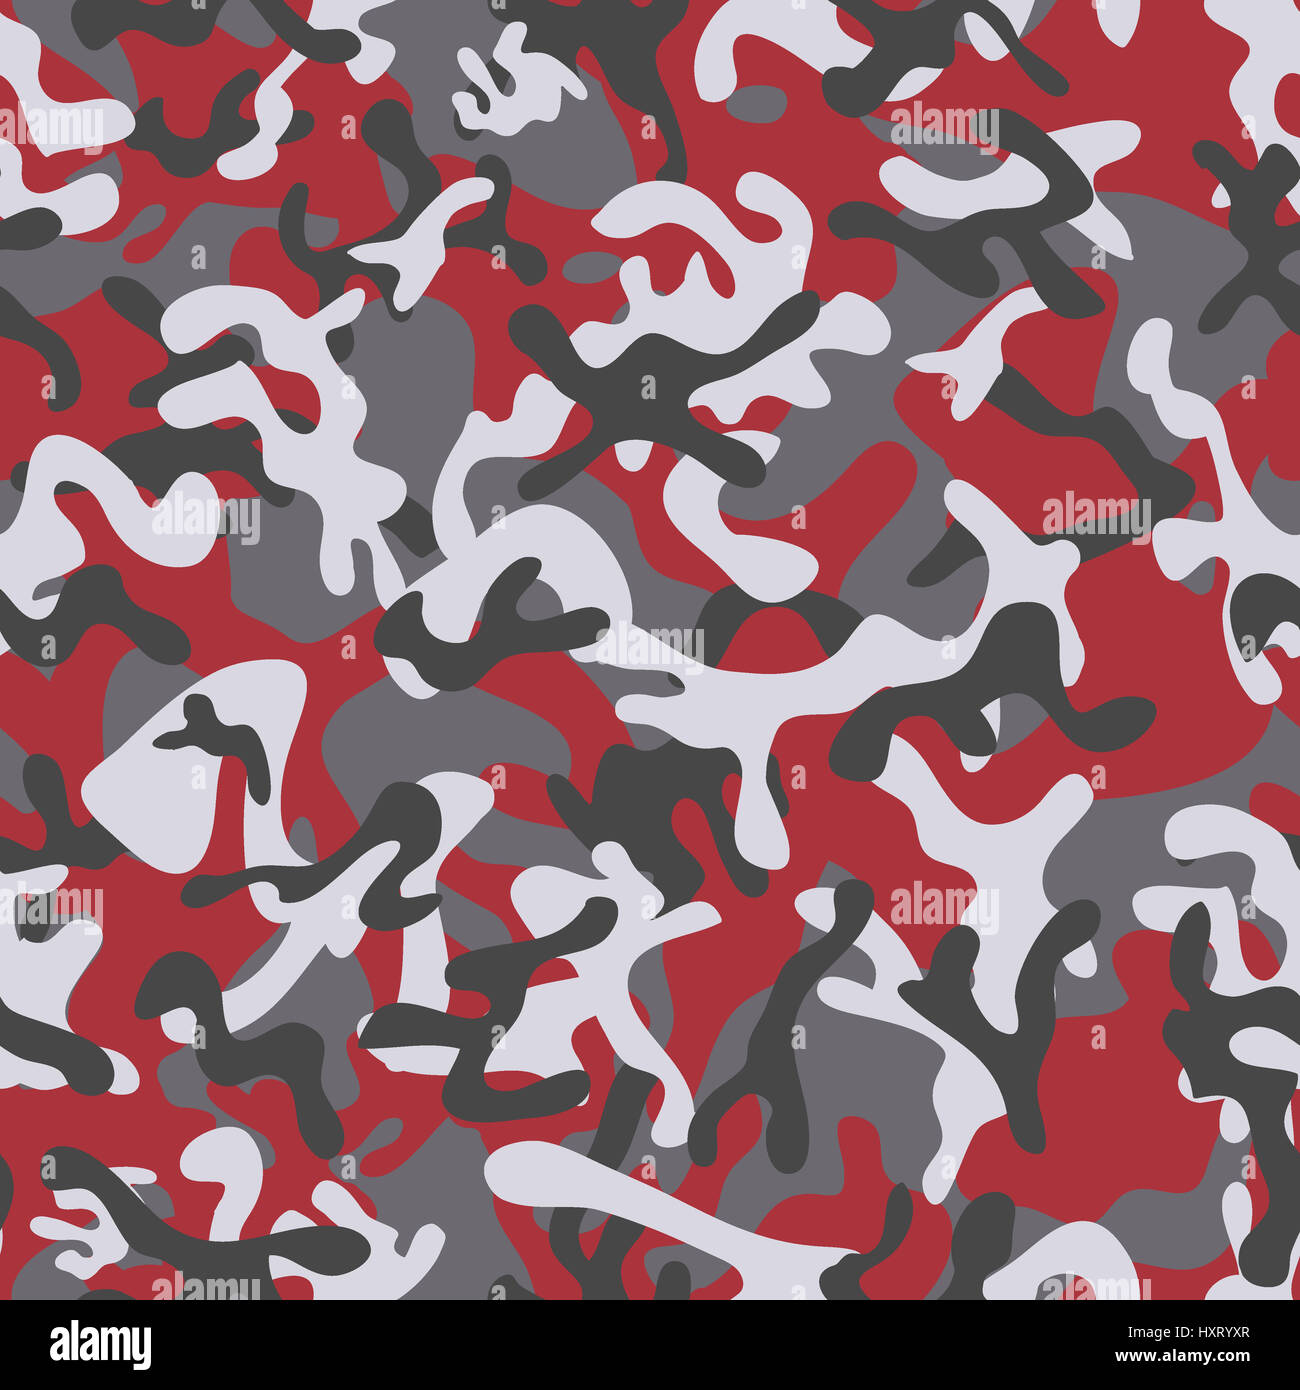 Forest Leaf Camouflage seamless patterns Stock Photo